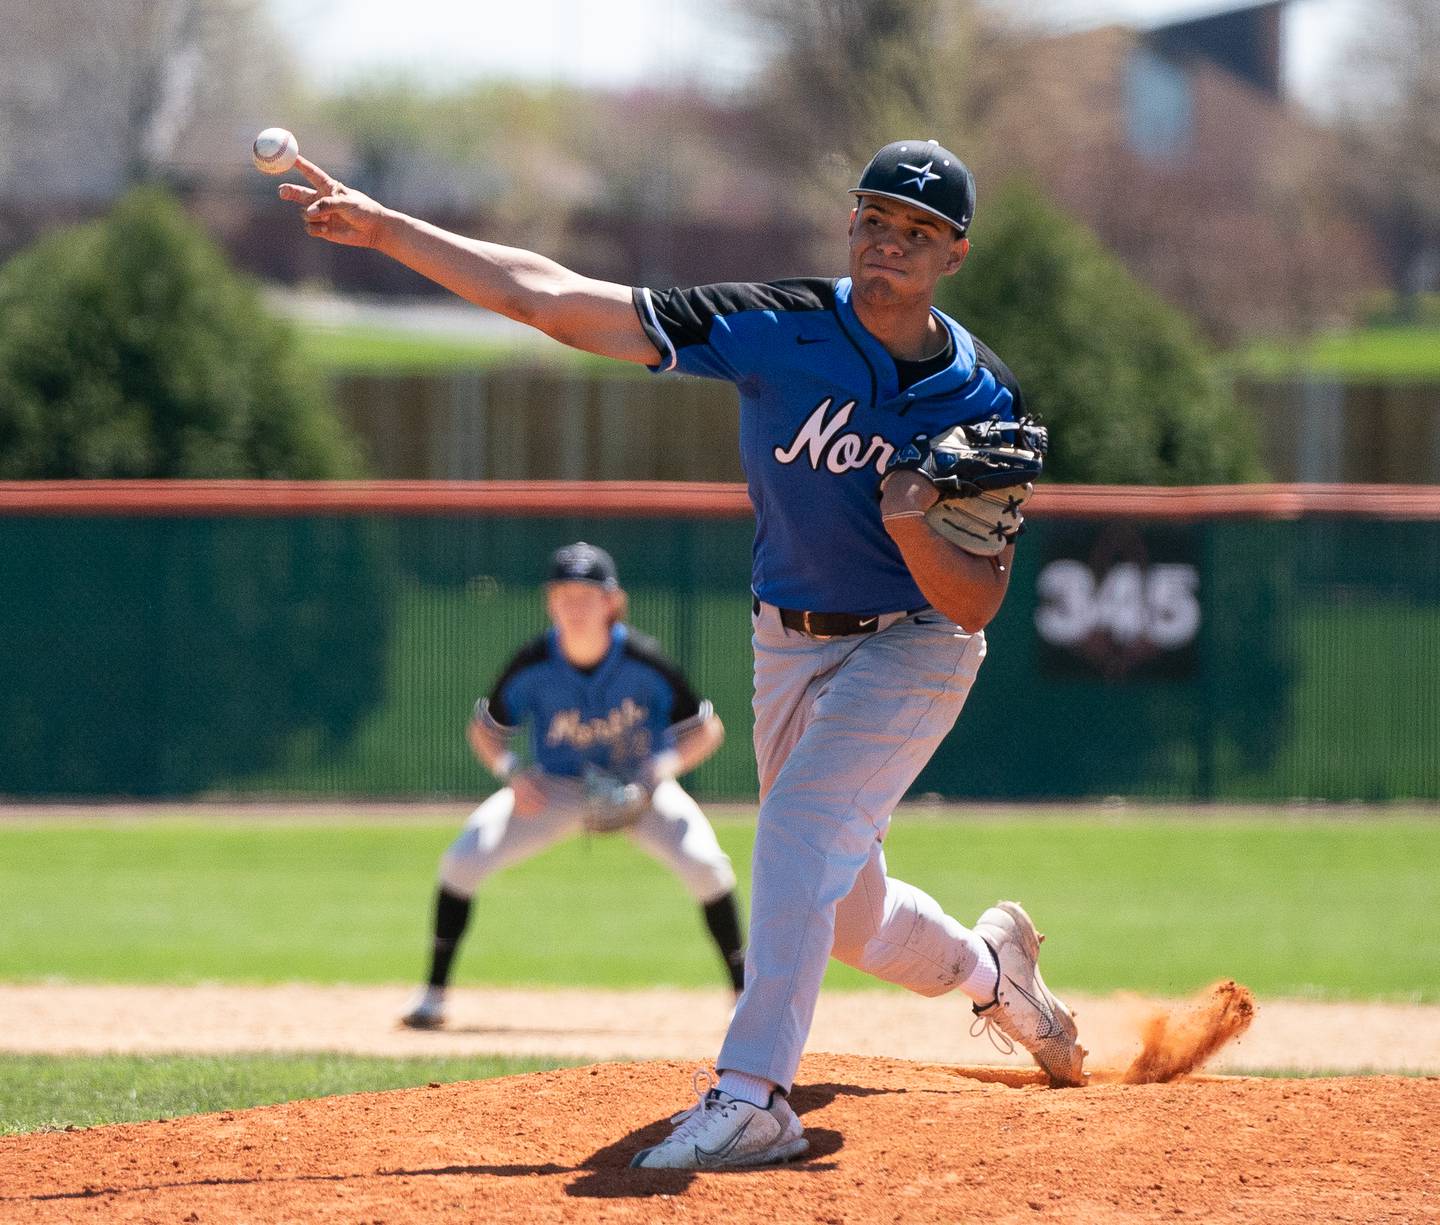 St. Charles North's Anthony Estrada (23) delivers a pitch against St. Charles East during a baseball game at St. Charles East High School on Saturday, May 7, 2022.